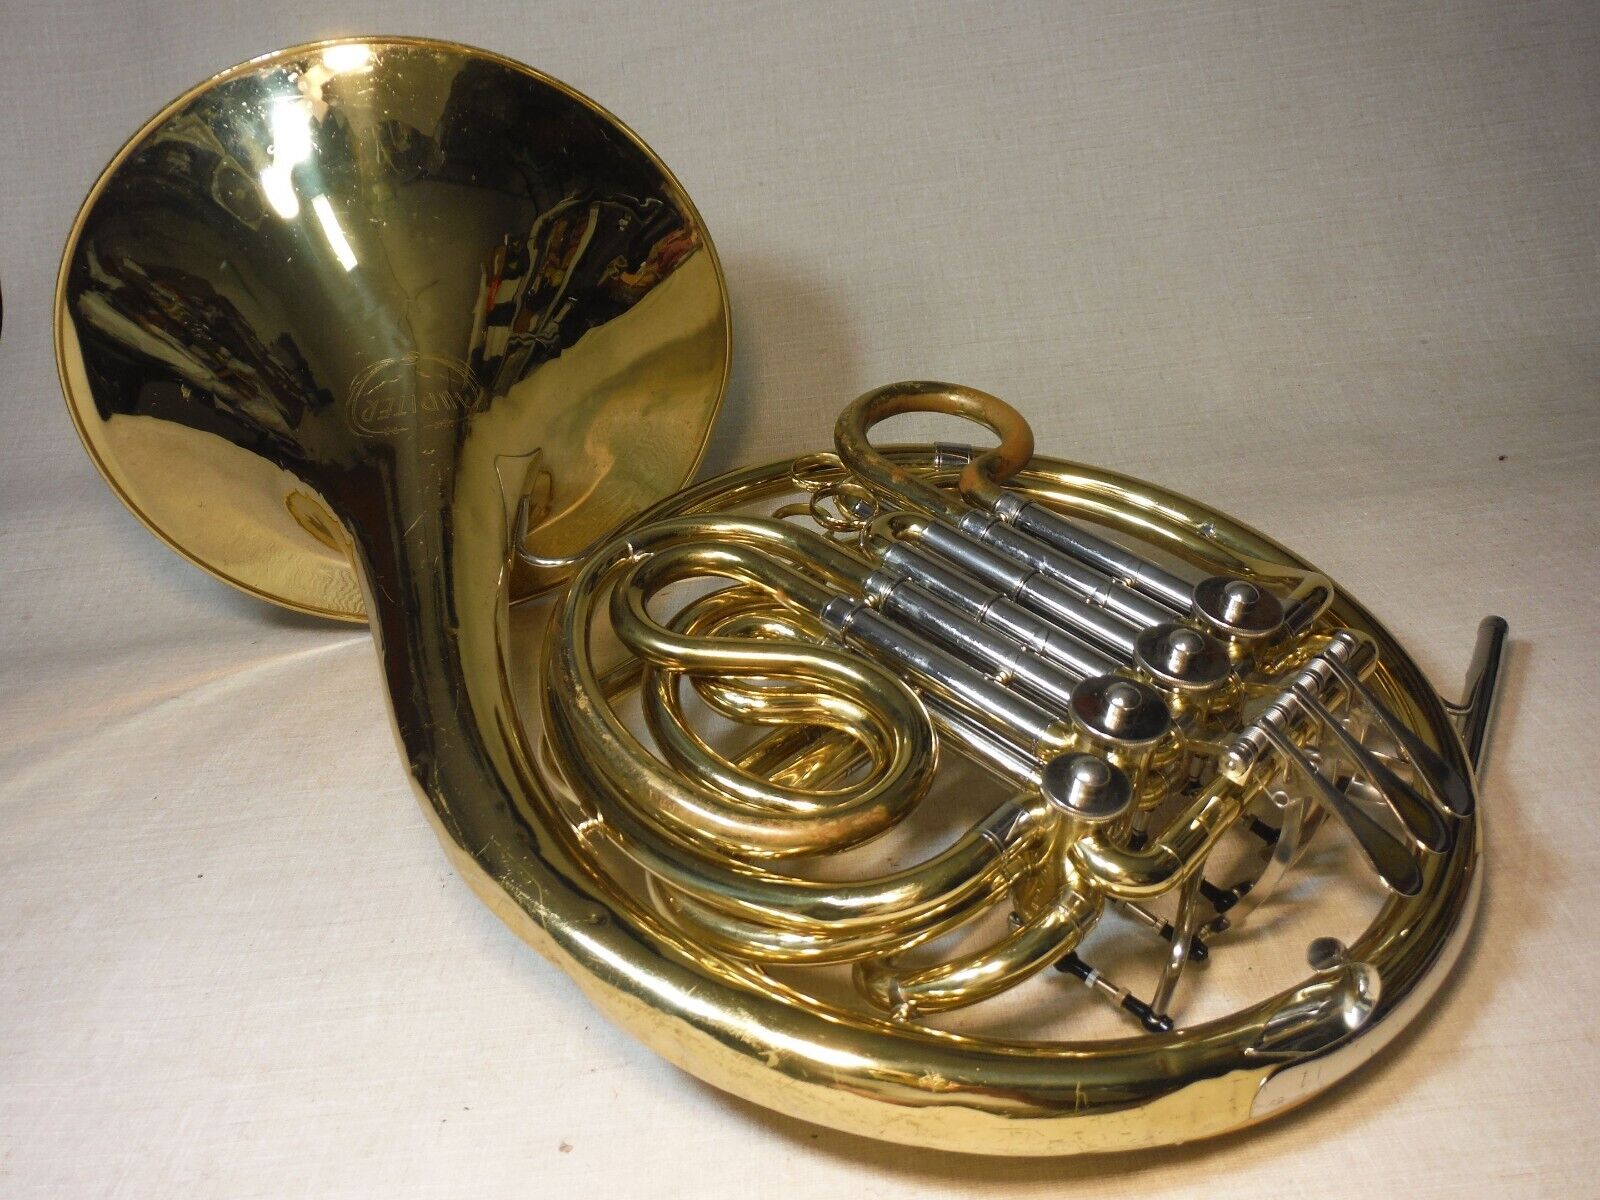 JUPITER JHR-852 DOUBLE FRENCH HORN BRASS WORKING GOOD W/DENTS CASE MOUTHPIECE 19